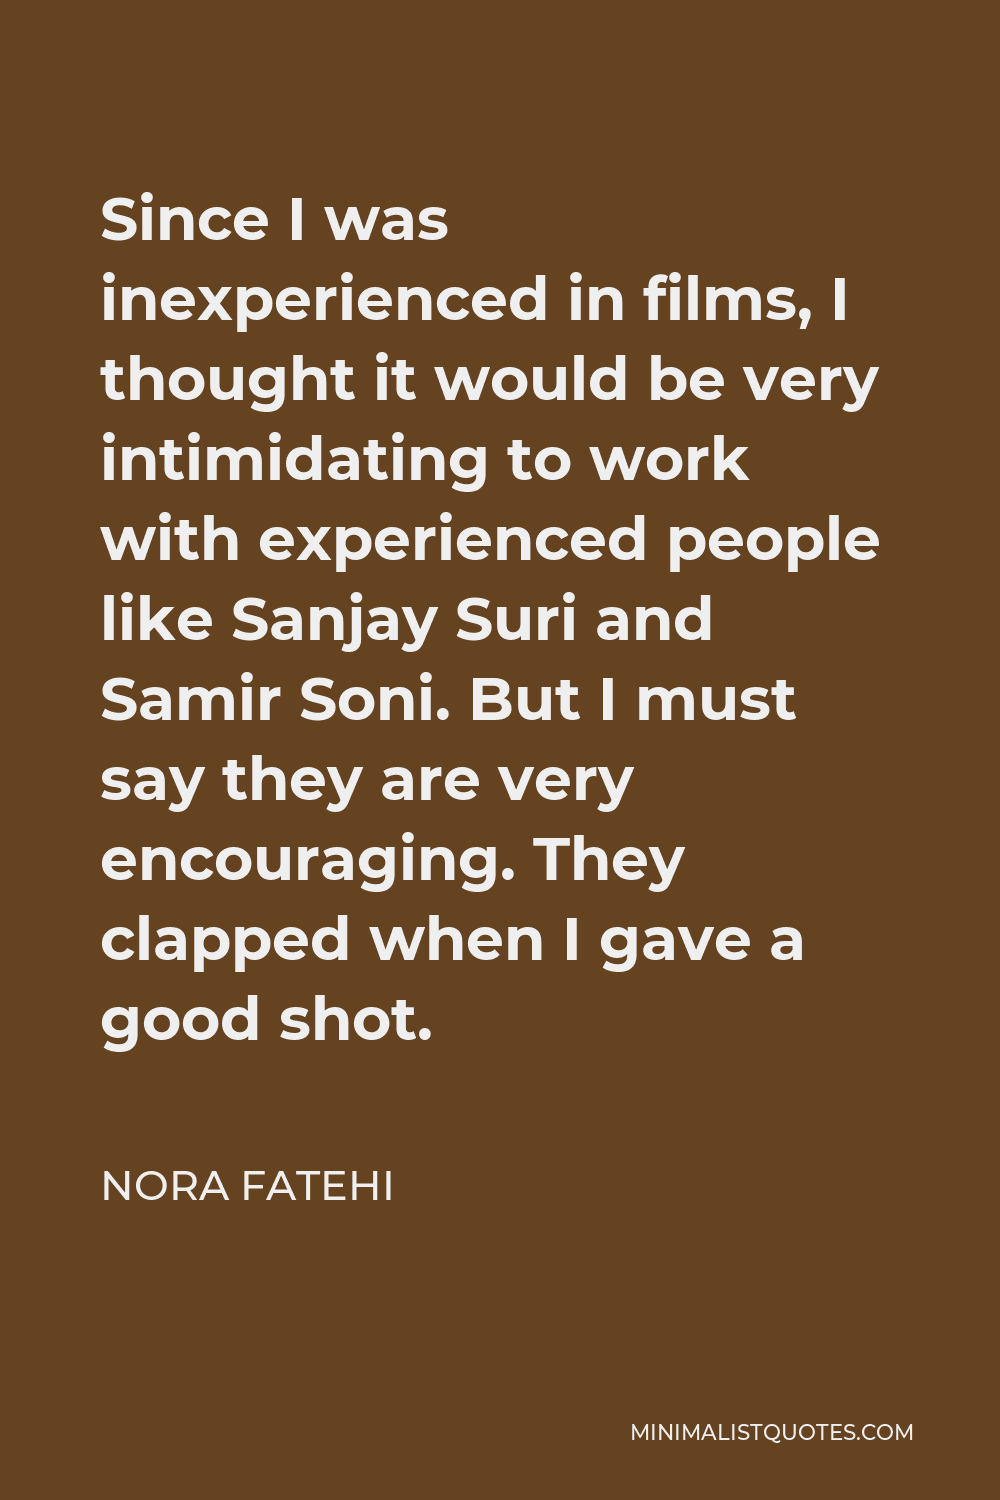 Nora Fatehi Quote - Since I was inexperienced in films, I thought it would be very intimidating to work with experienced people like Sanjay Suri and Samir Soni. But I must say they are very encouraging. They clapped when I gave a good shot.